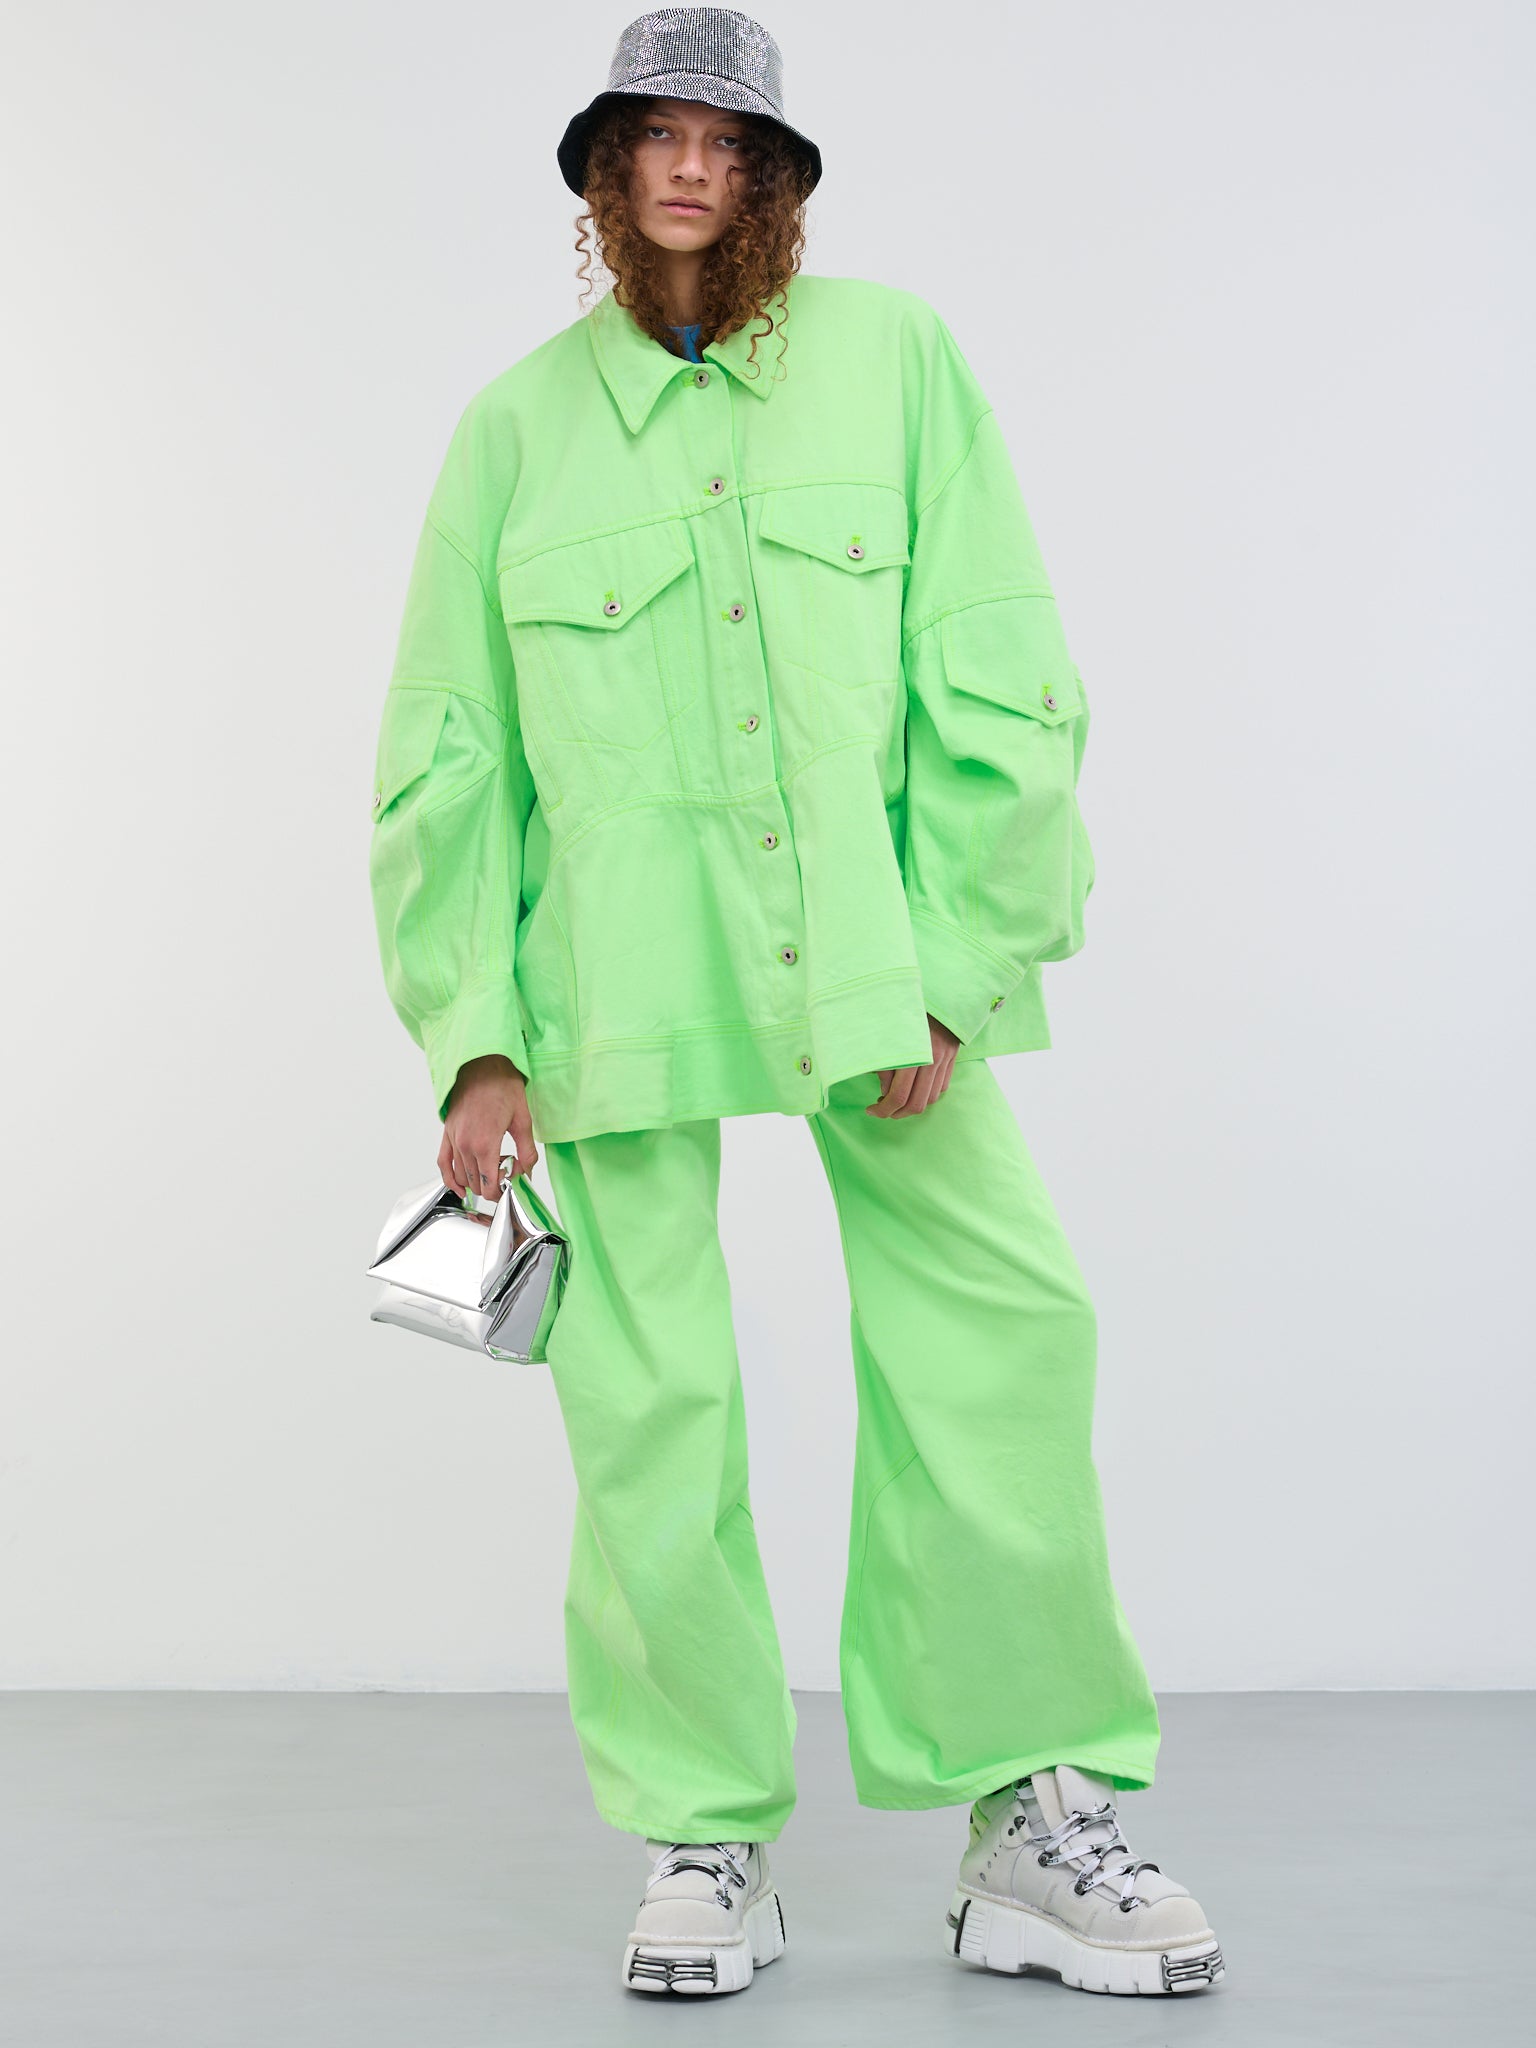 Bold Statement Lime Green Pants — More Than Your Average